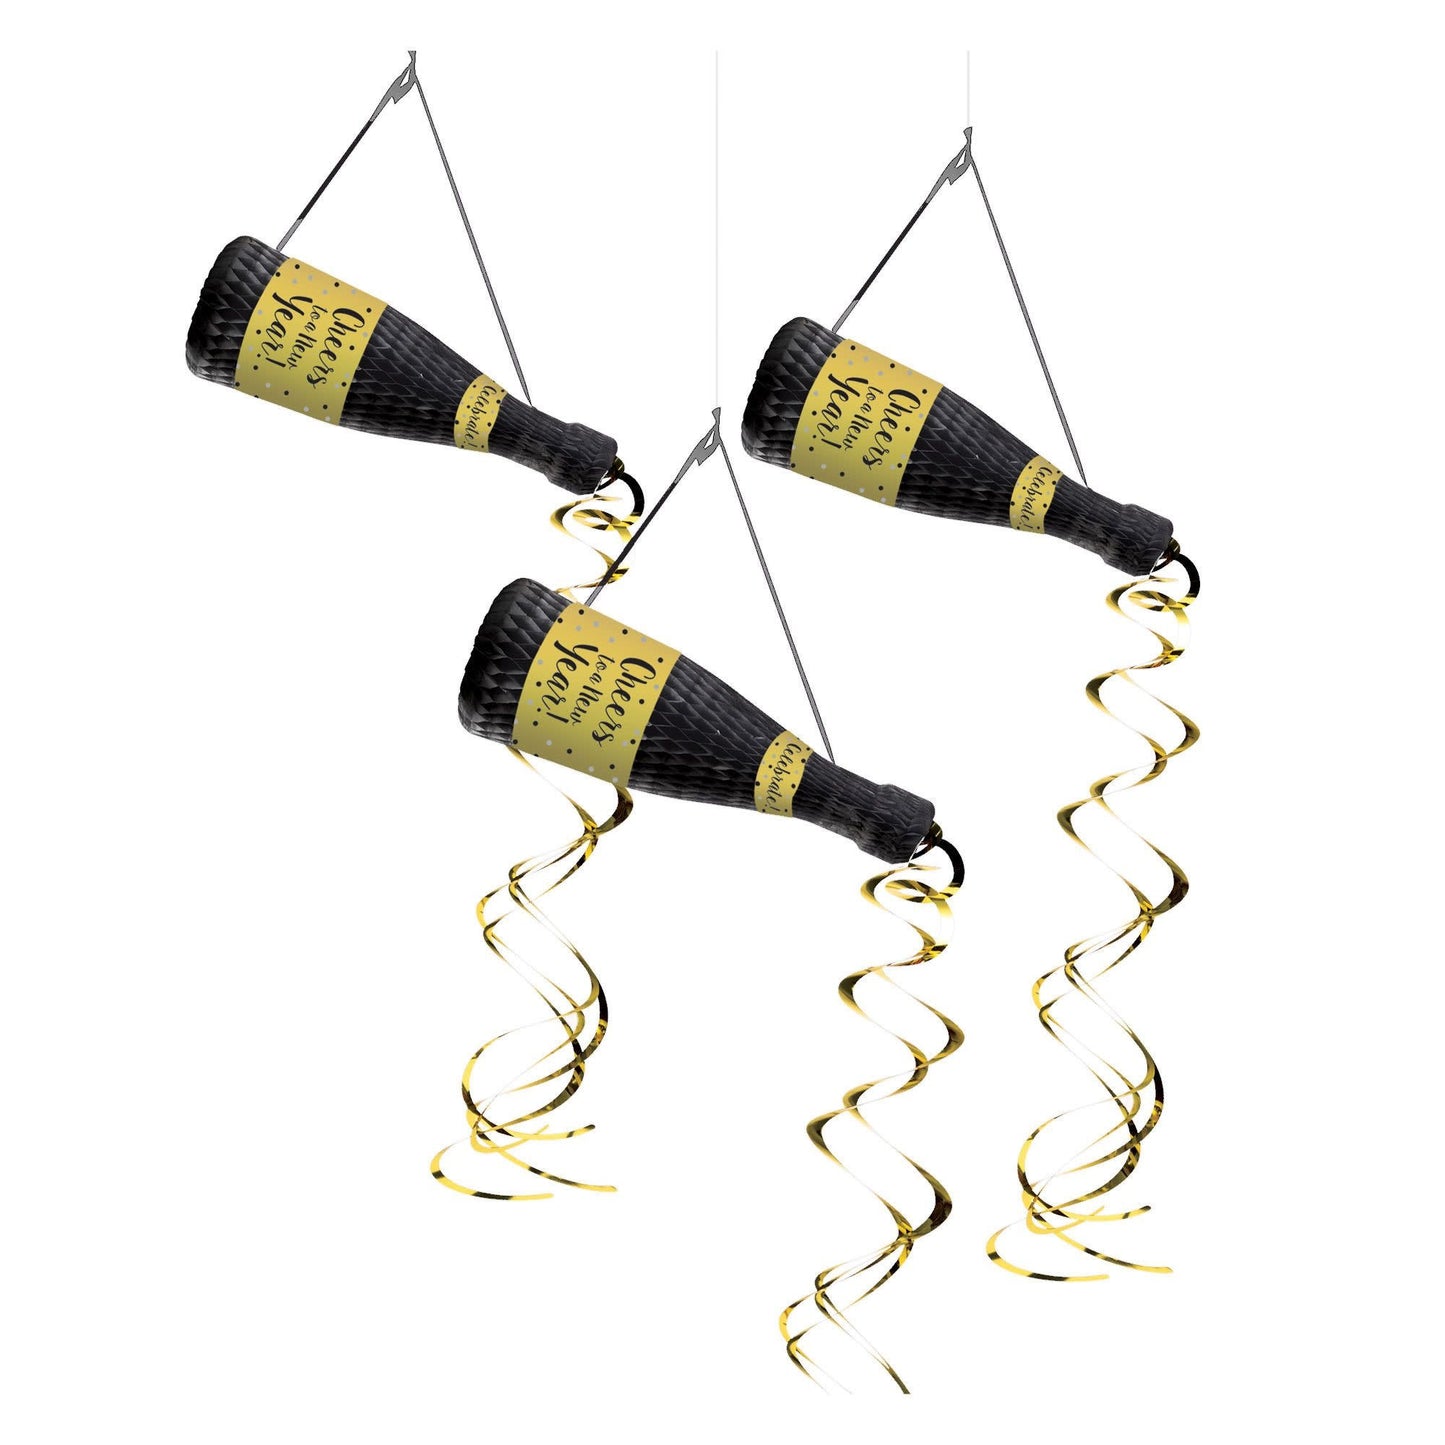 New Year's Bottle Hanging Decorations (3pk.)